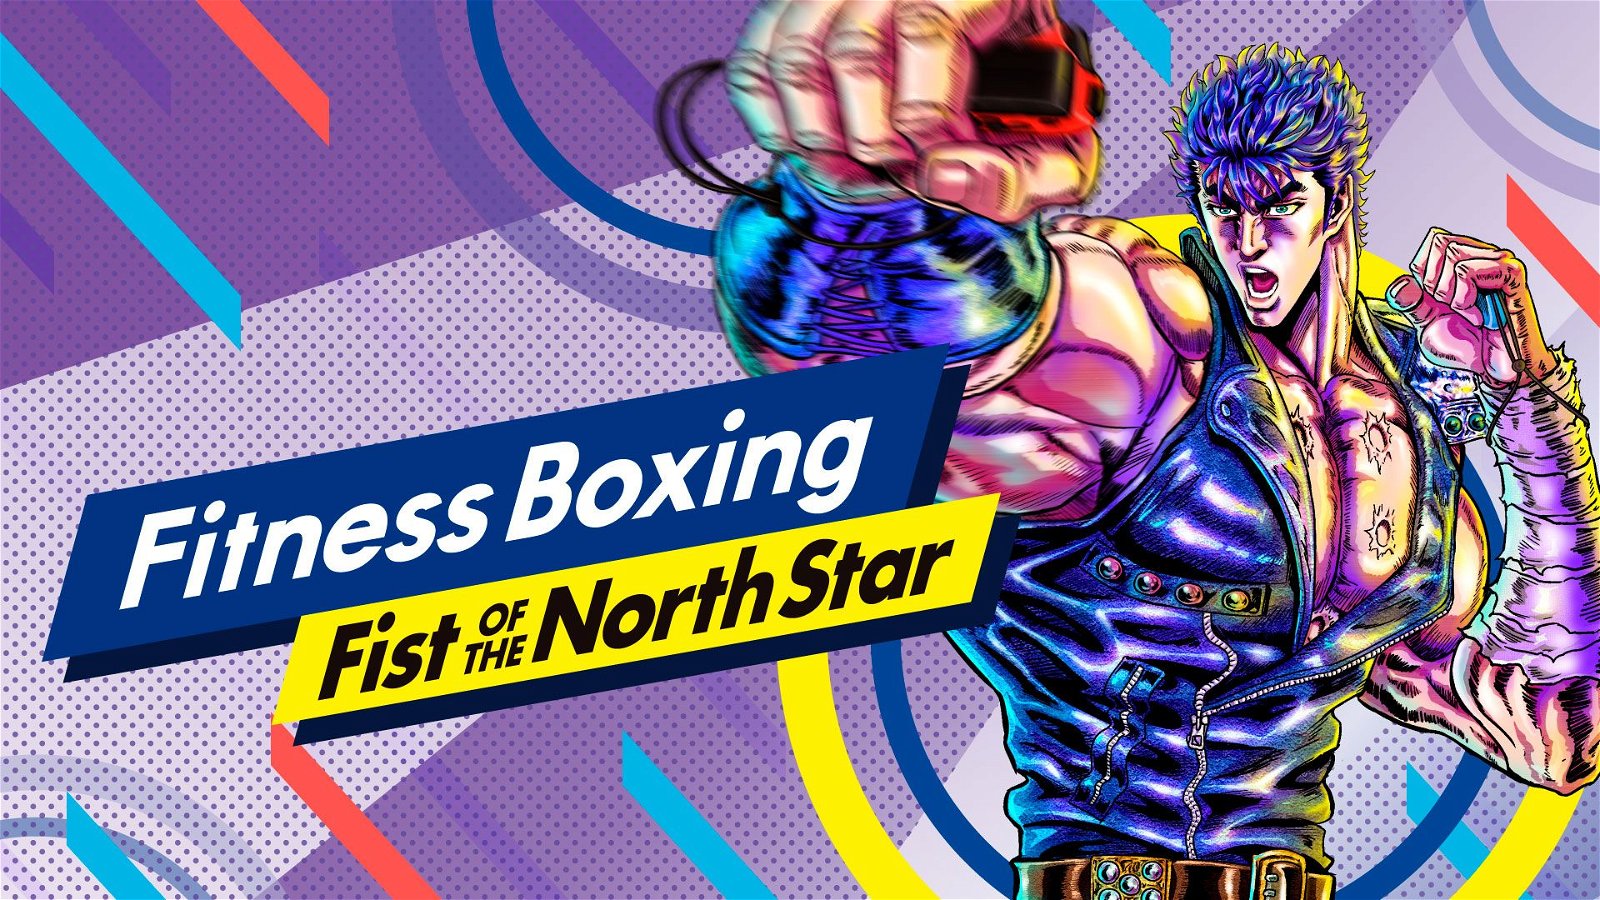 Image of Fitness Boxing Fist of the North Star